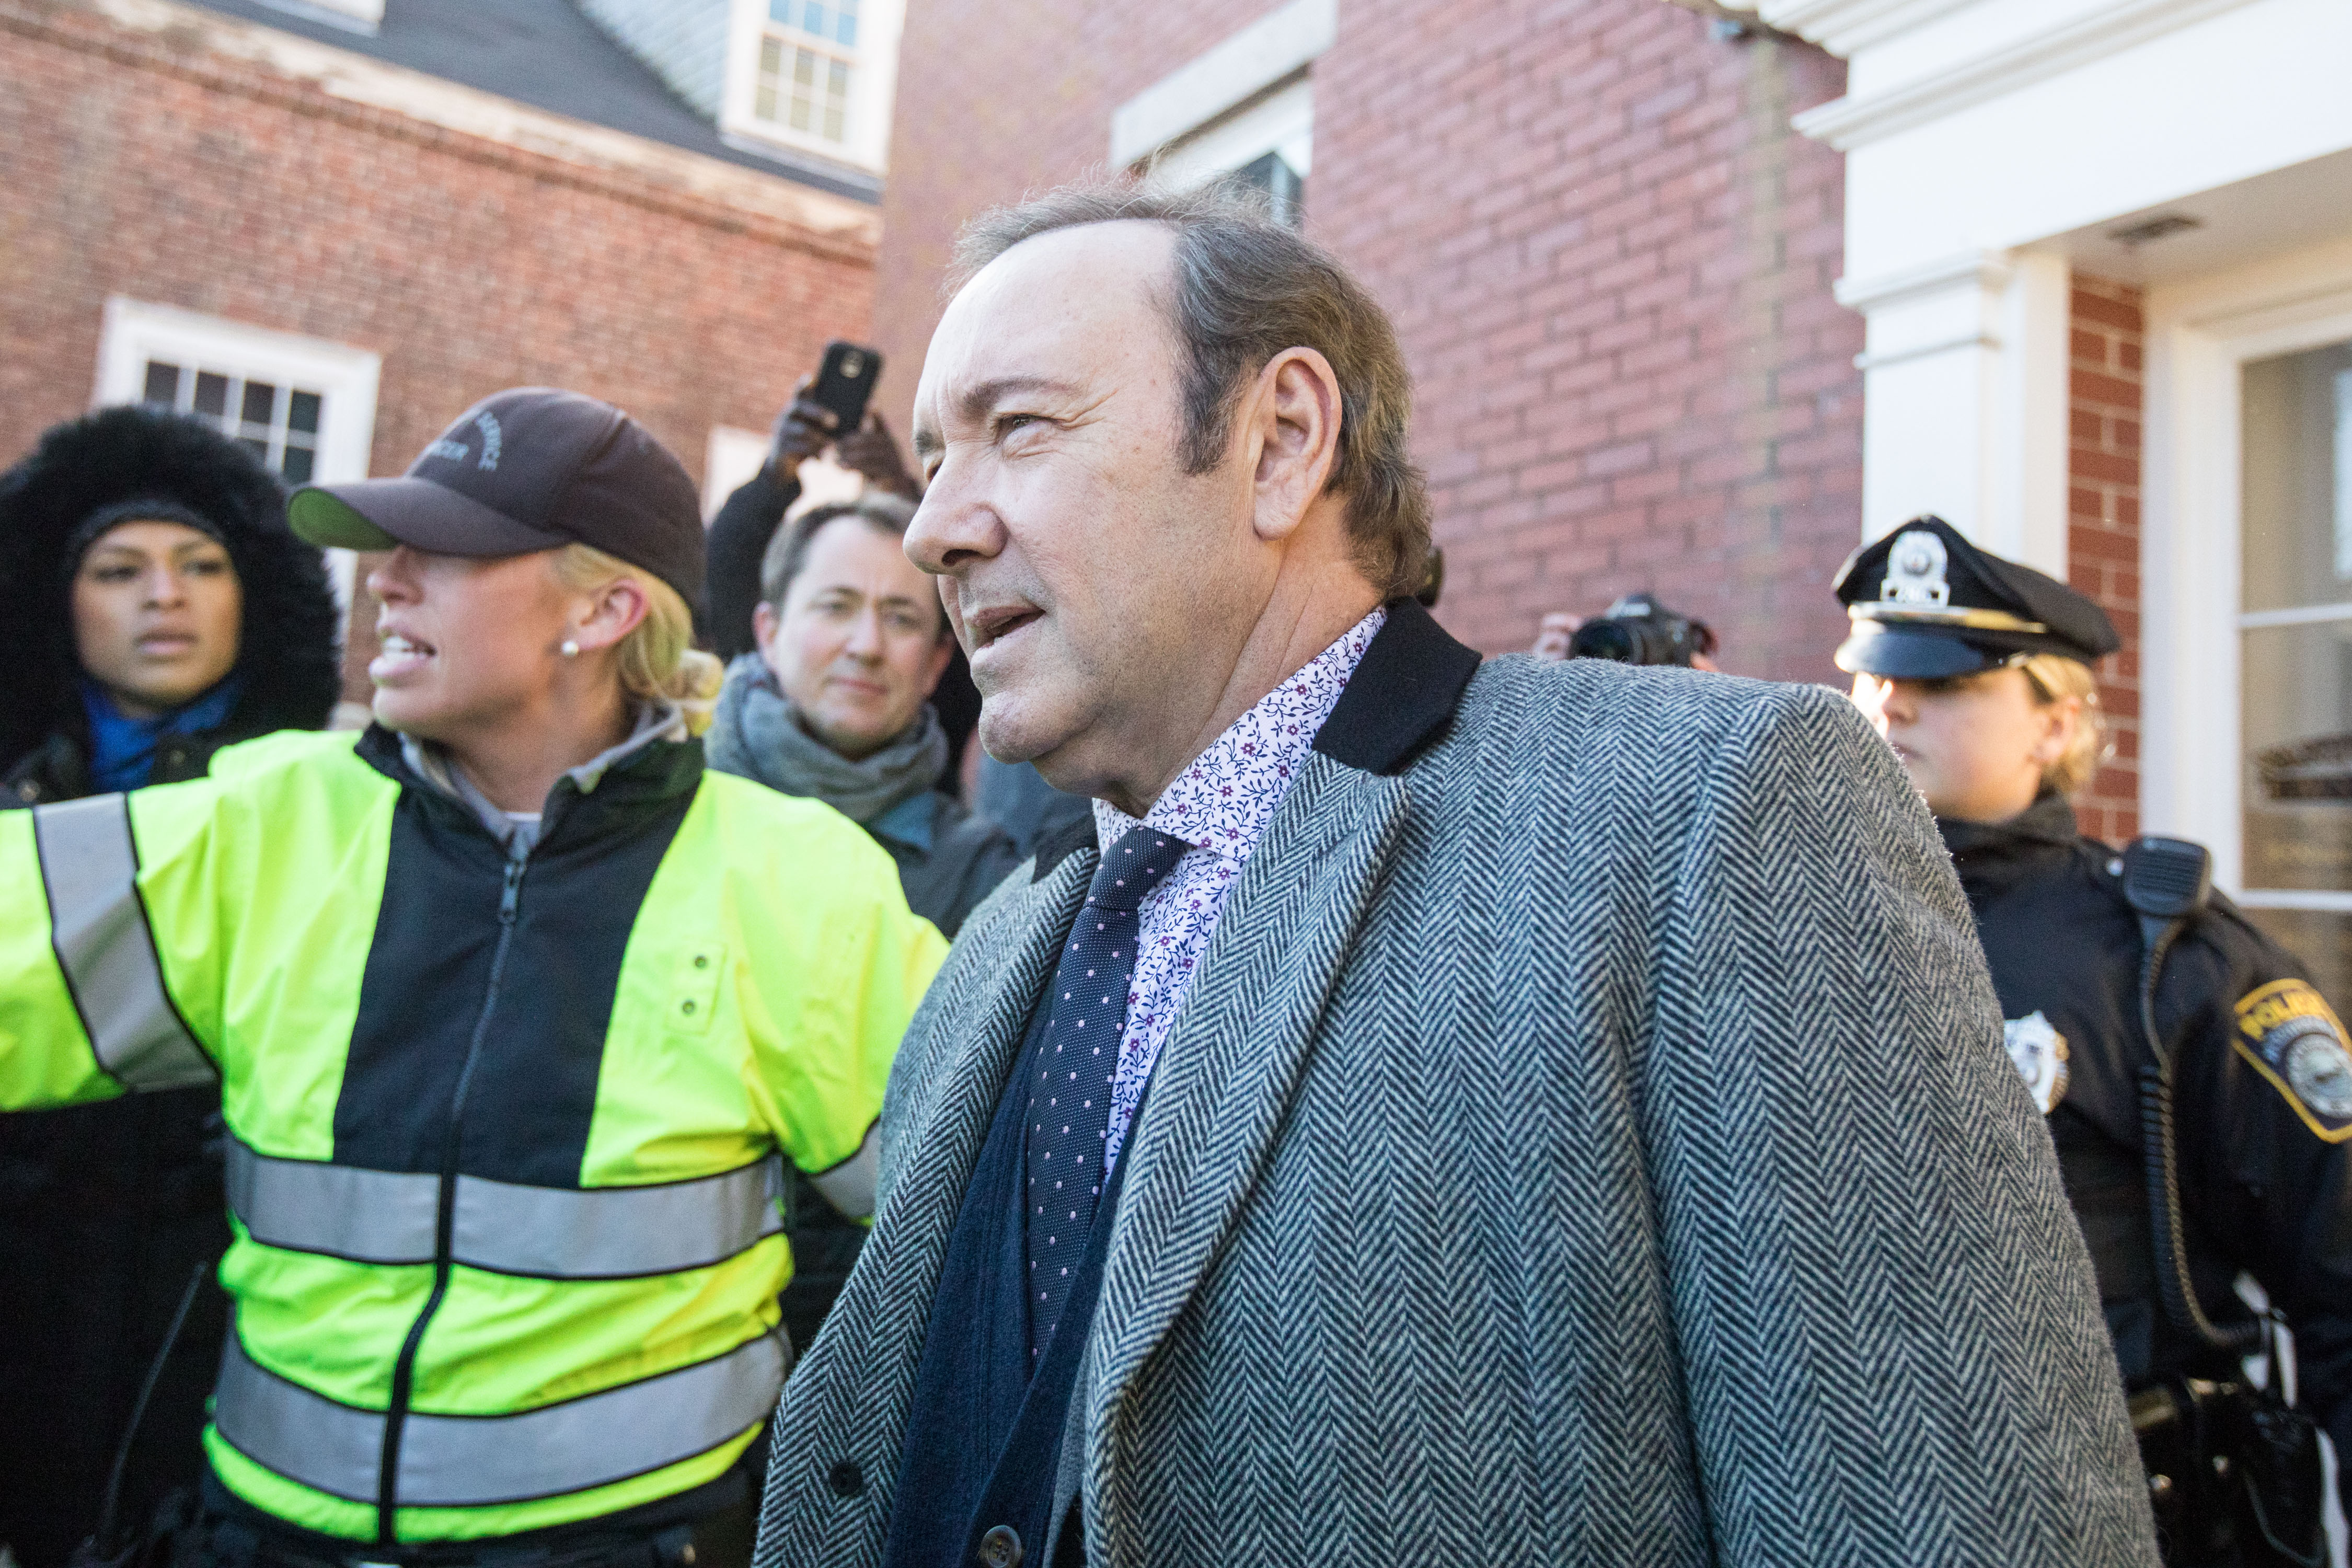 Actor Kevin Spacey leaves Nantucket District Court after being arraigned on sexual assault charges on January 7, 2019 in Nantucket, Massachusetts. (Photo by Scott Eisen/Getty Images)